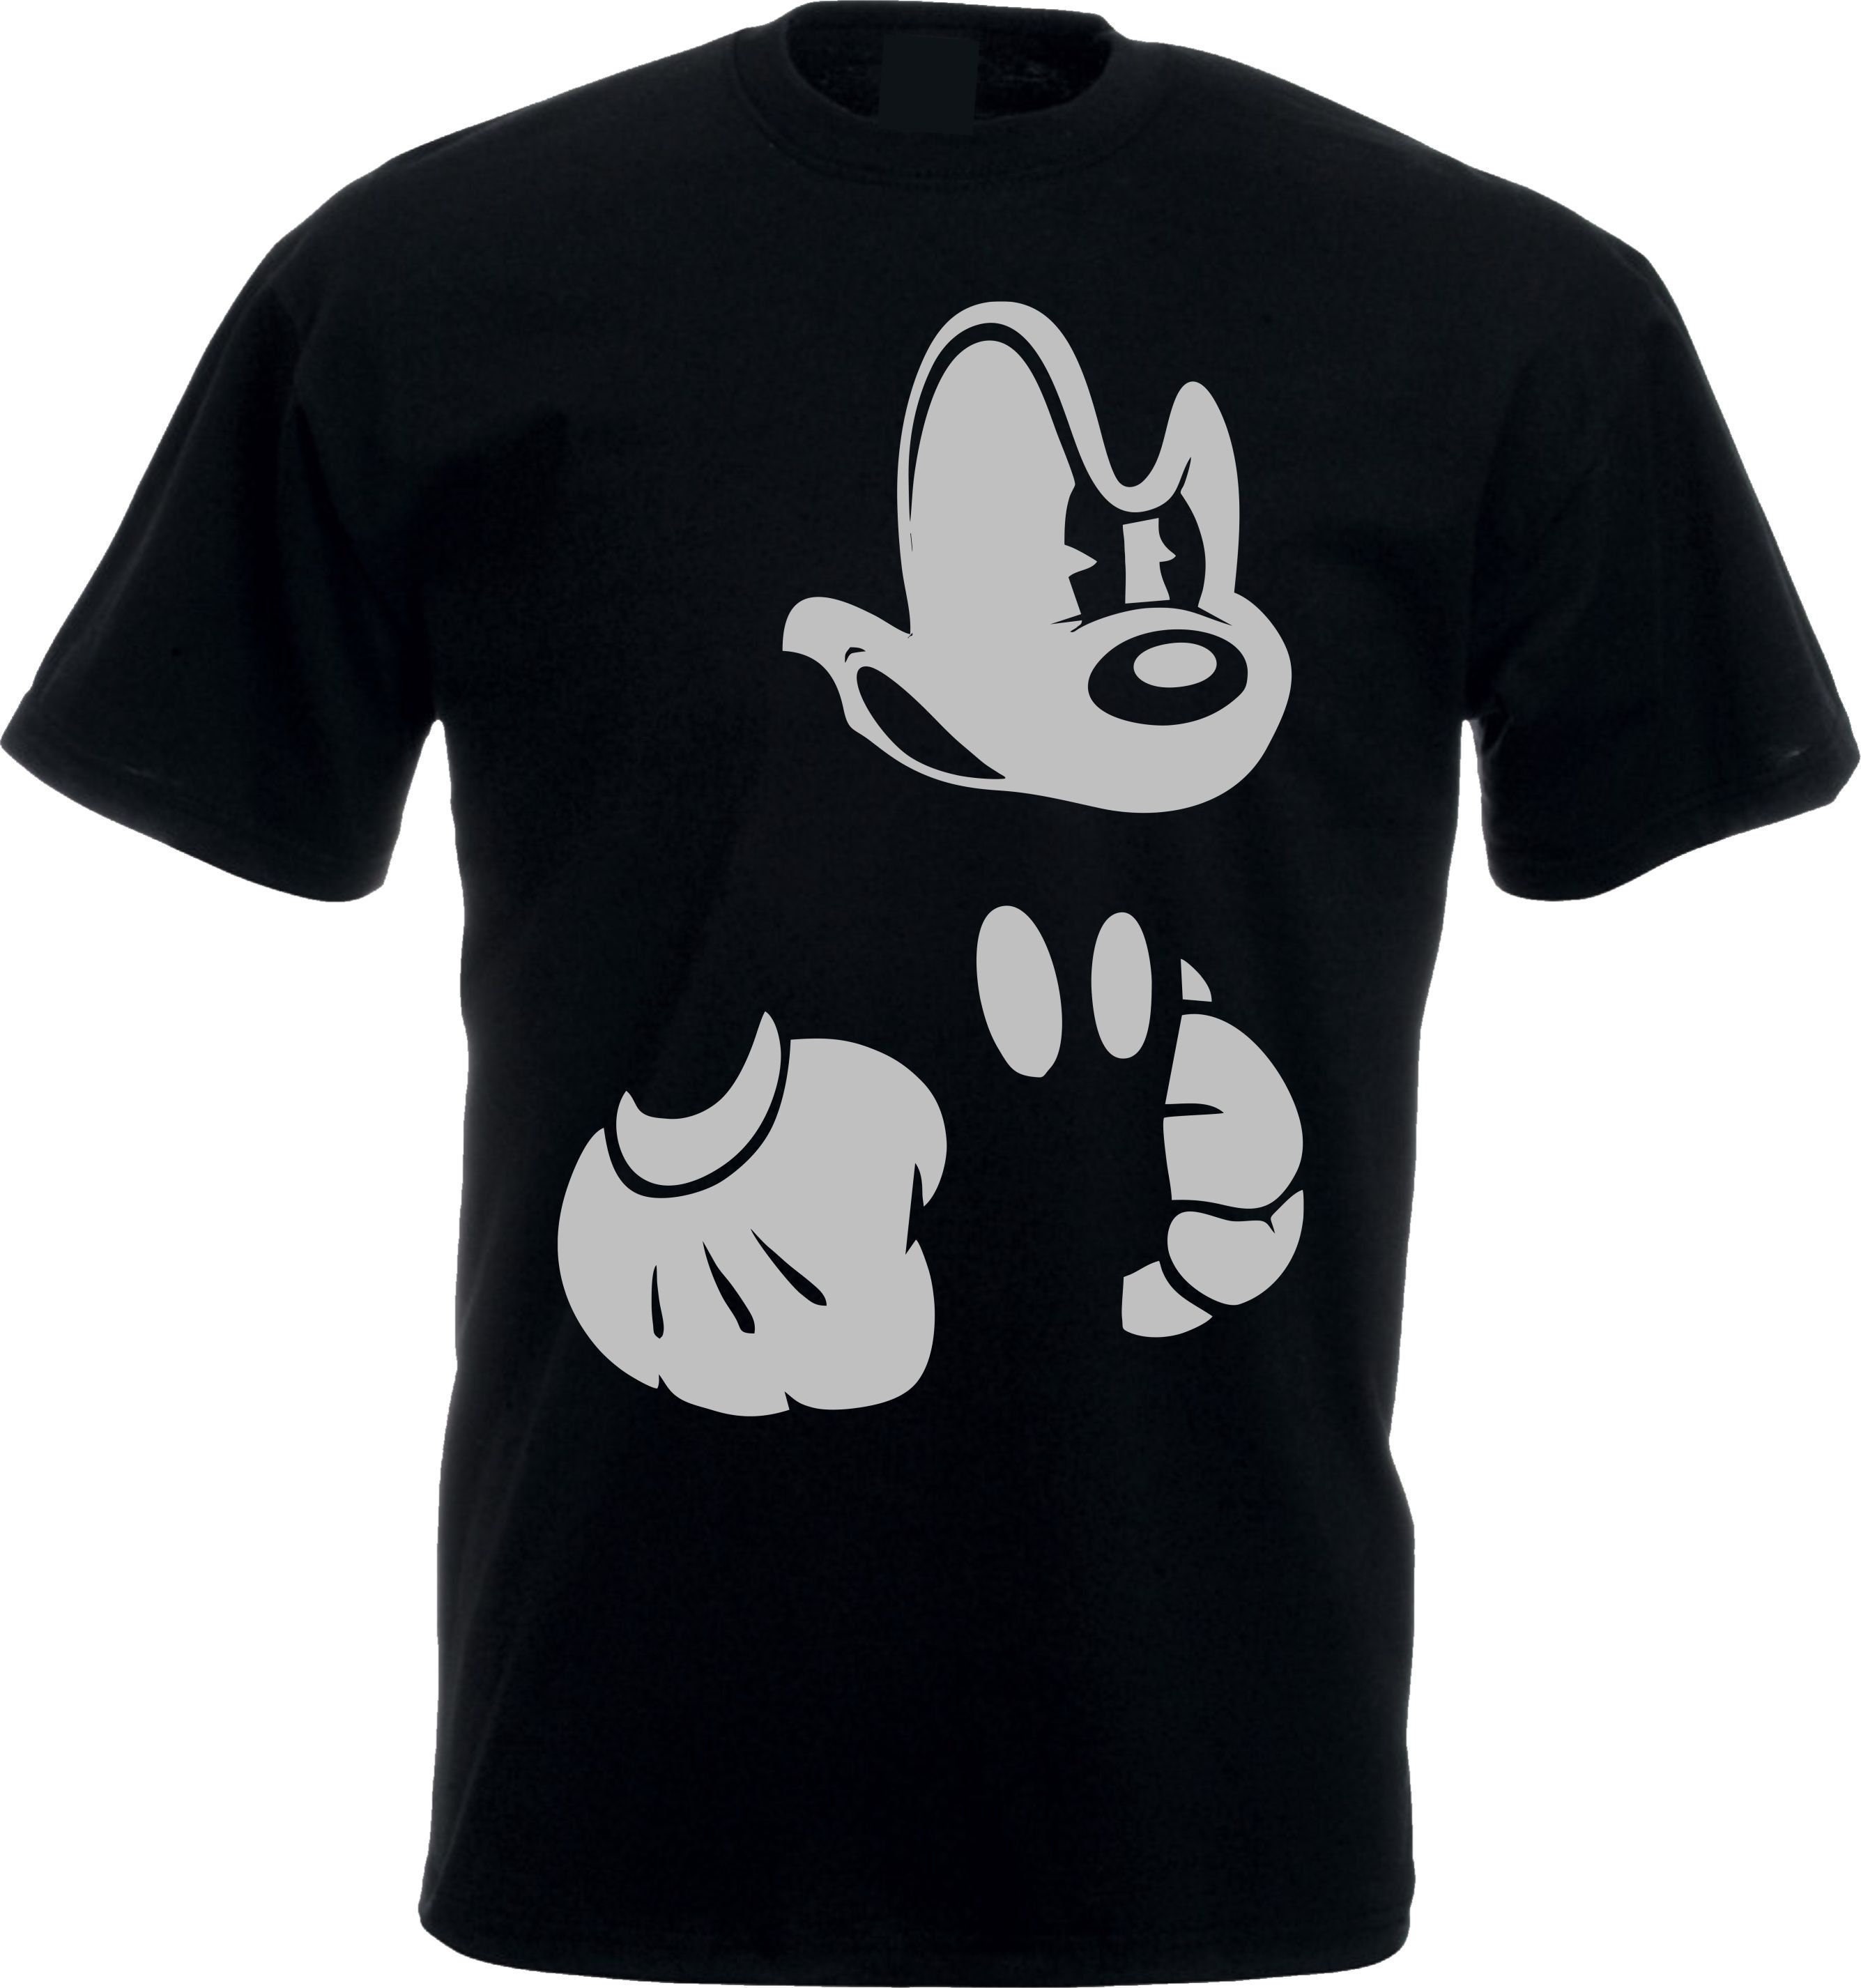 Discover Disney Mickey Mouse T-shirt, Minimalist Mickey Mouse Tee, T-Shirt